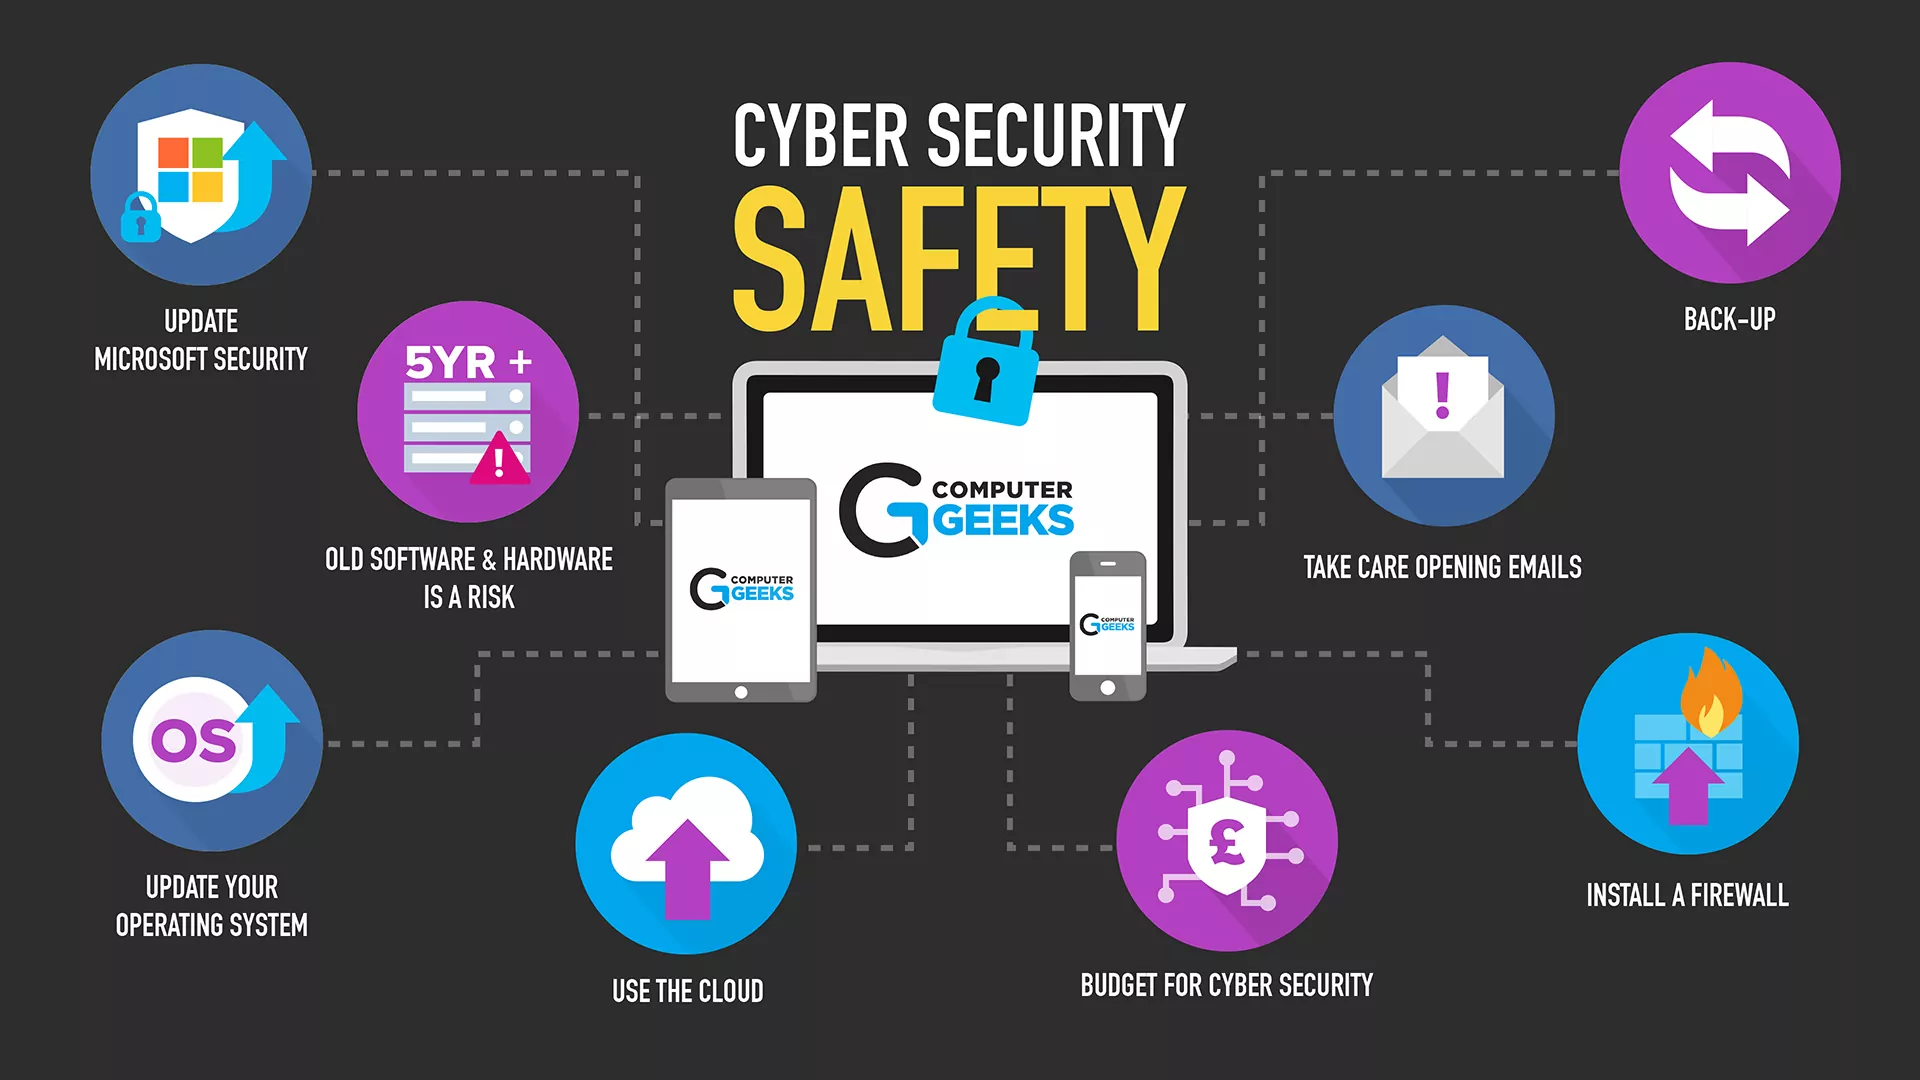 How to Secure Your Online Business Against Cyberattacks